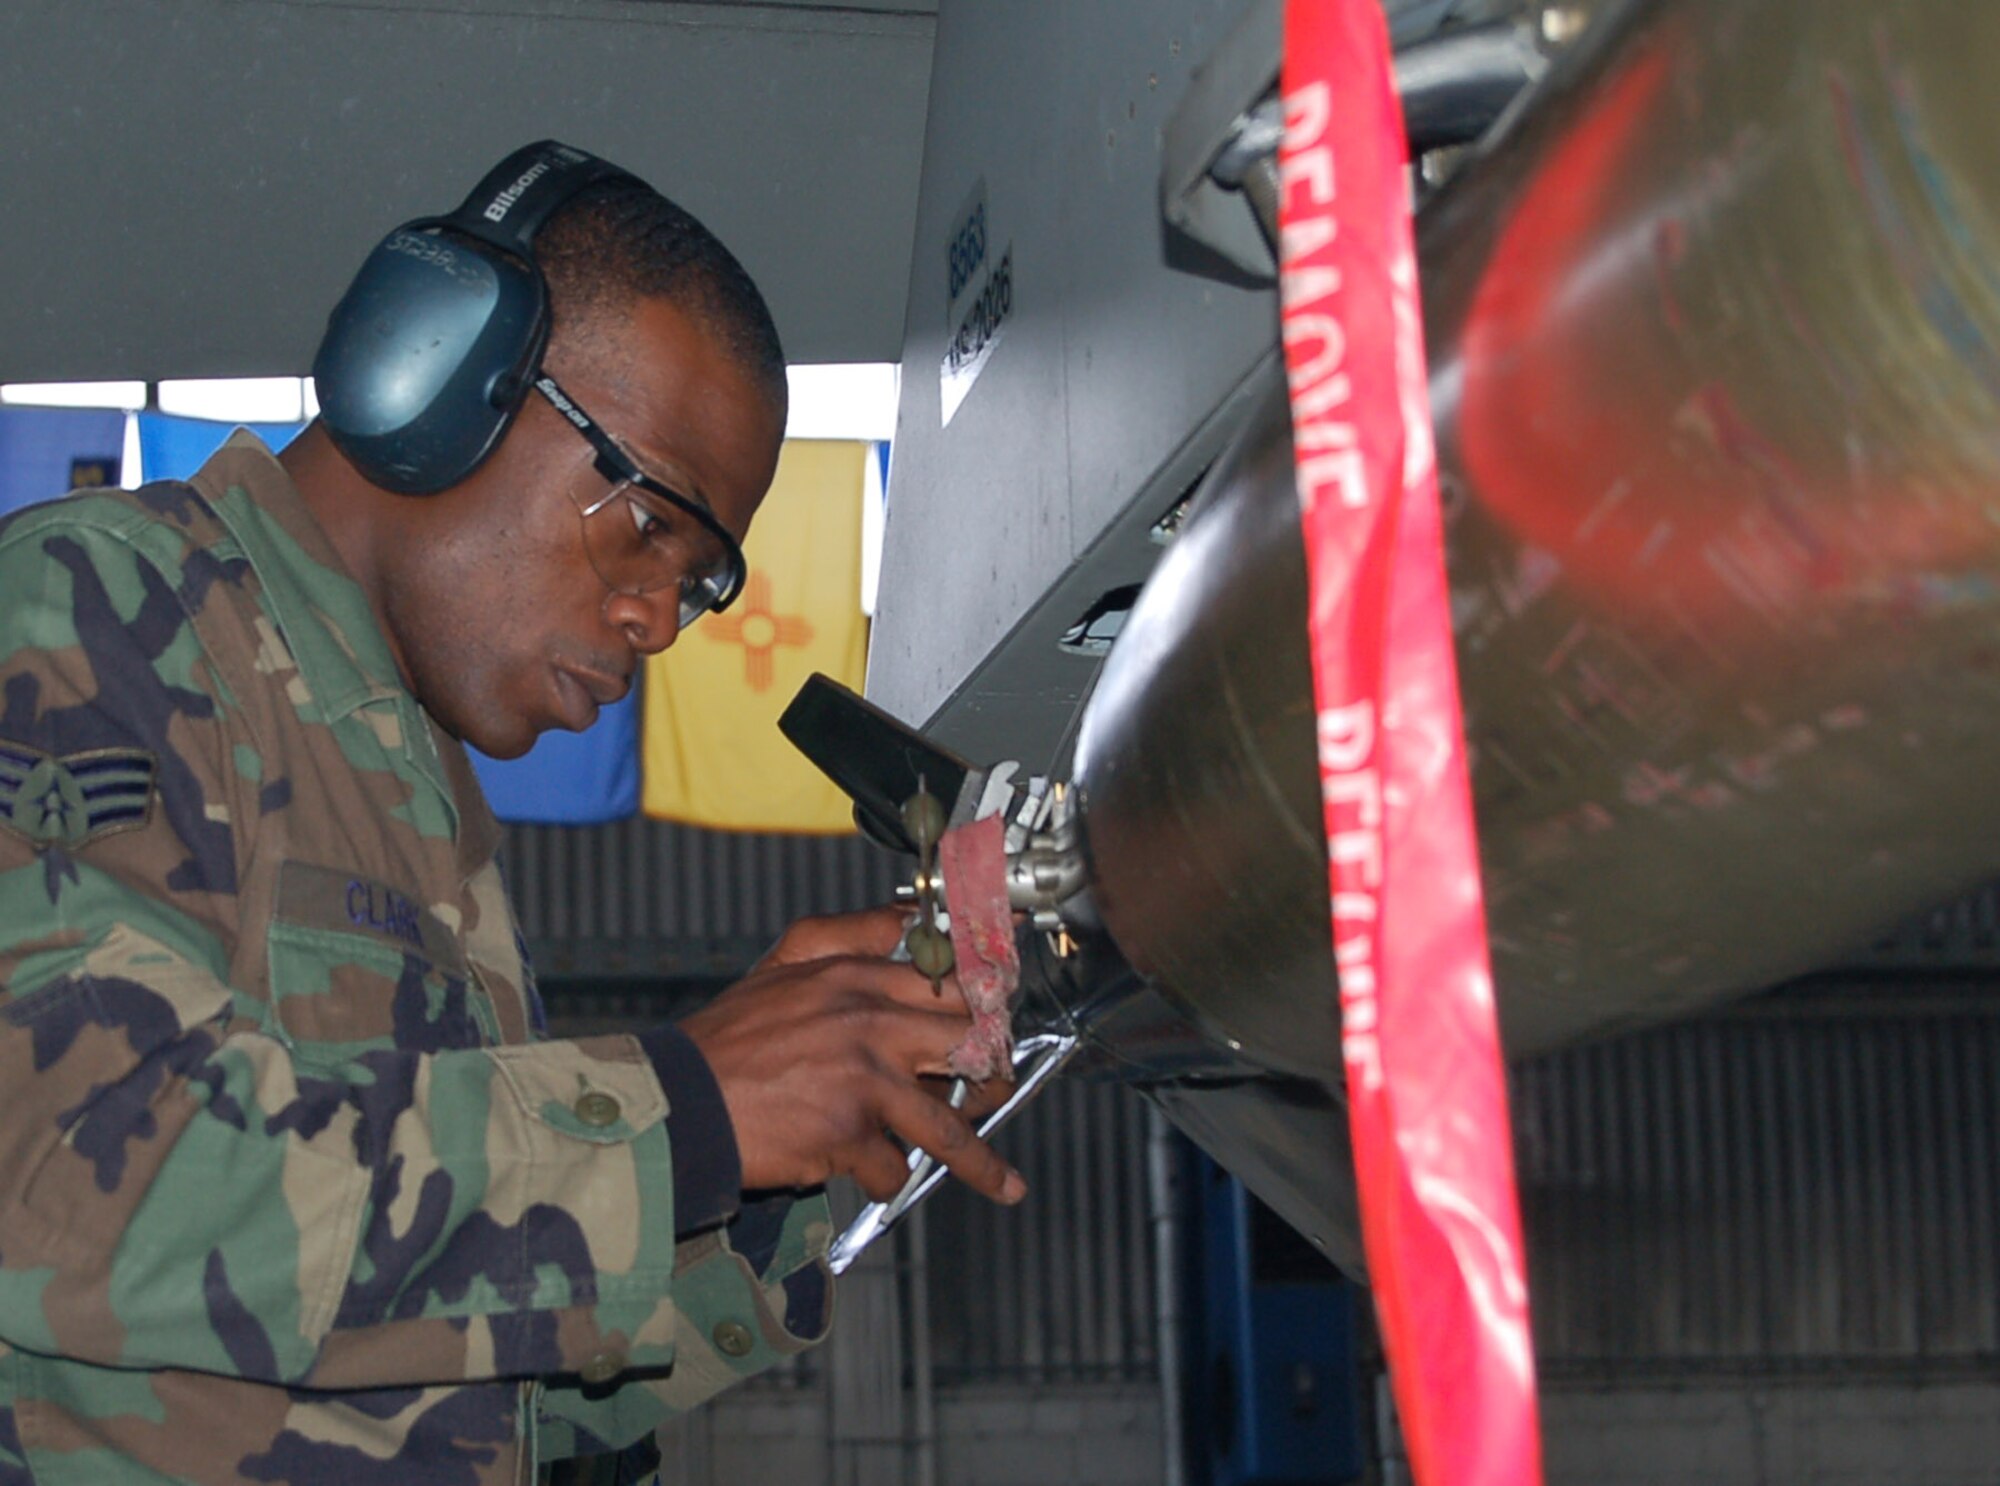 SPANGDAHLEM AIR BASE, Germany -- Senior Airman Damon Clark, 23rd Aircraft Maintenance Unit load crew, cuts the arming wire on an MK-82 low drag bomb during a weapons load competition Sept. 11. The 23rd AMU load crew won the competition. (U.S. Air Force photo/Staff Sgt. Tammie Moore)